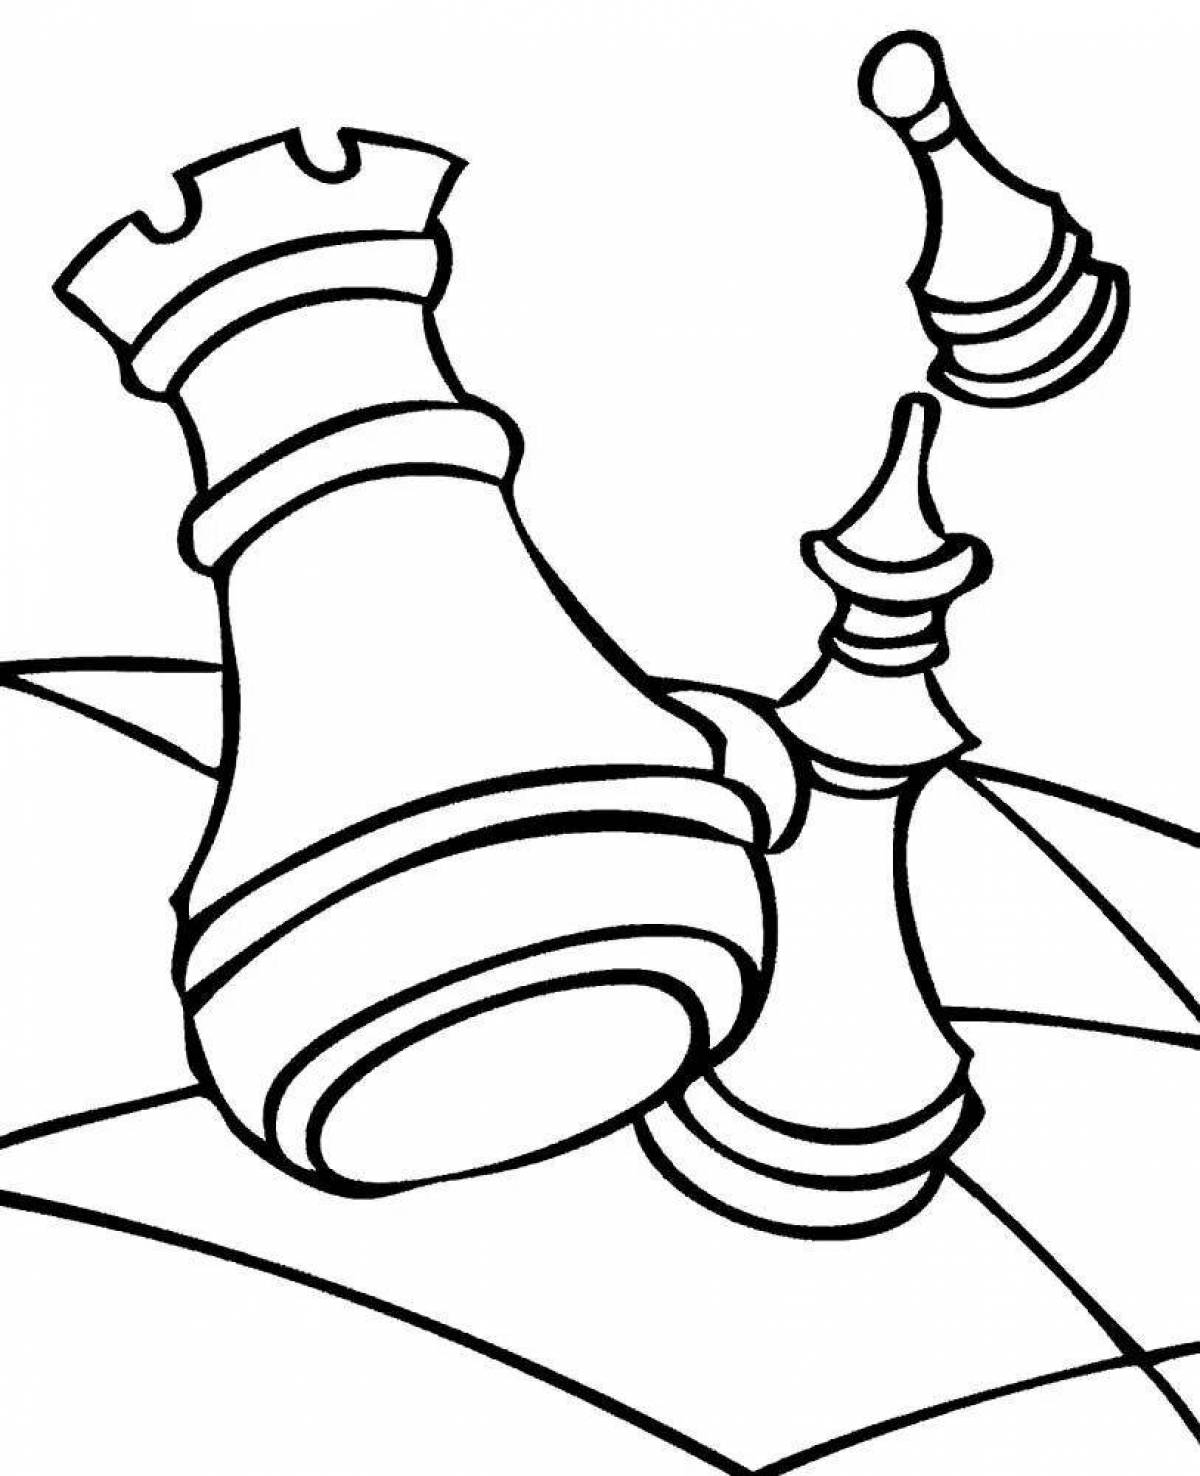 Coloring captive chess